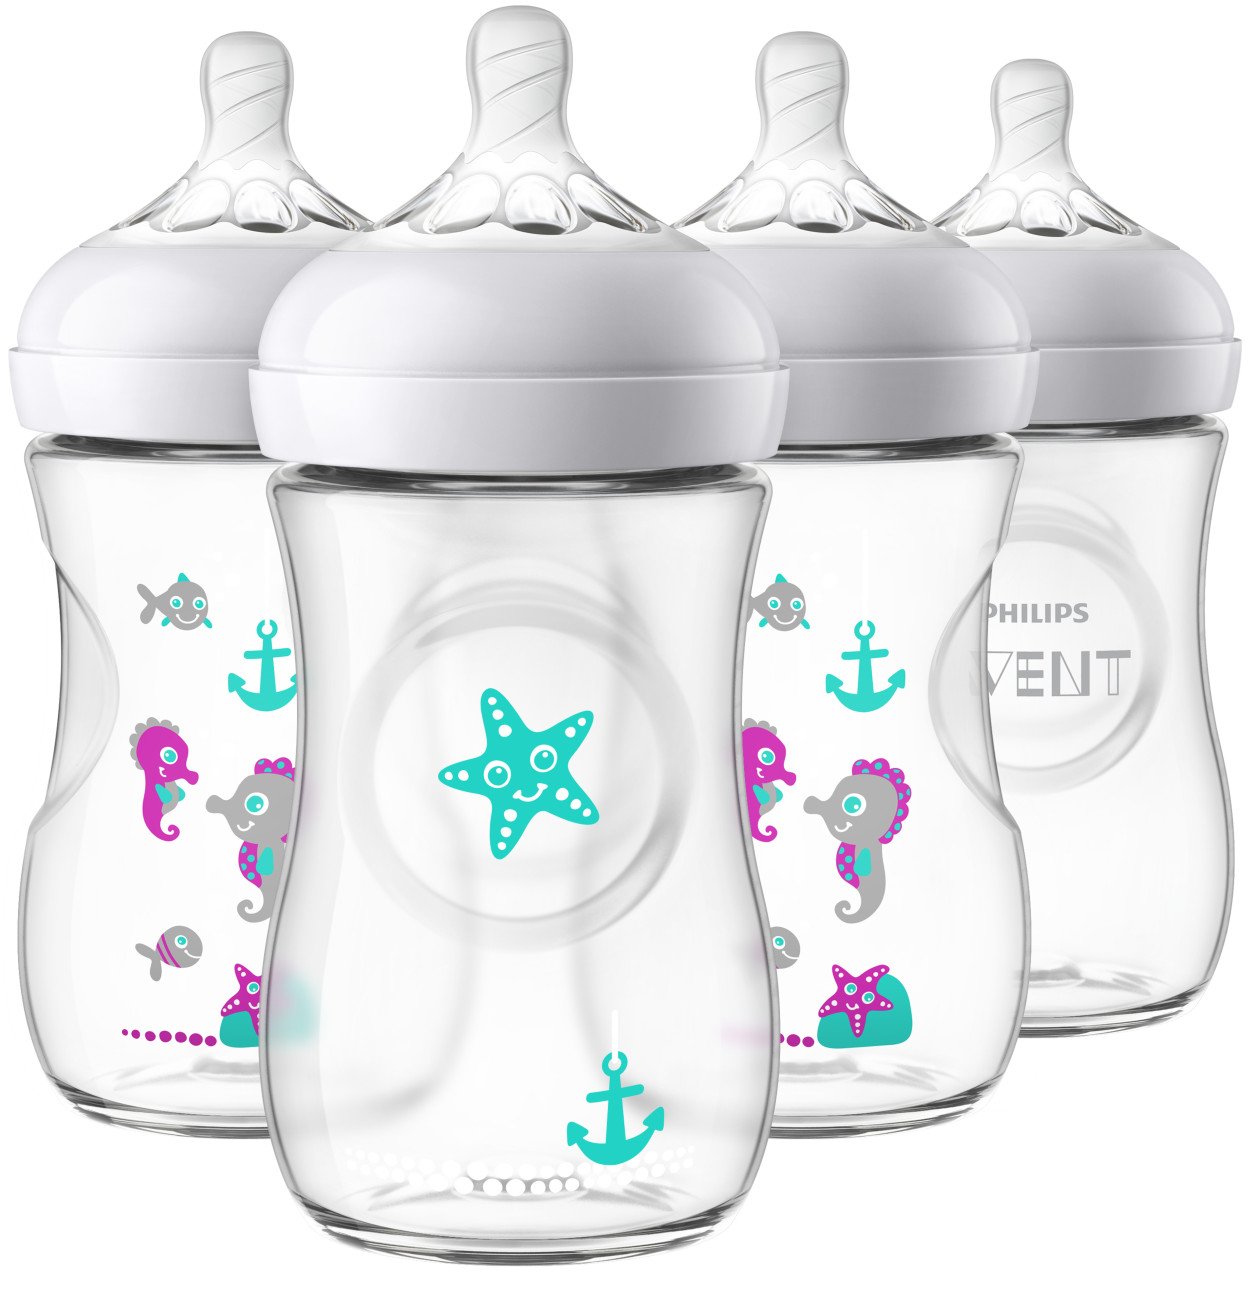 Philips Avent Clear Baby Bottle For Breastfed Babies, 4-Pack